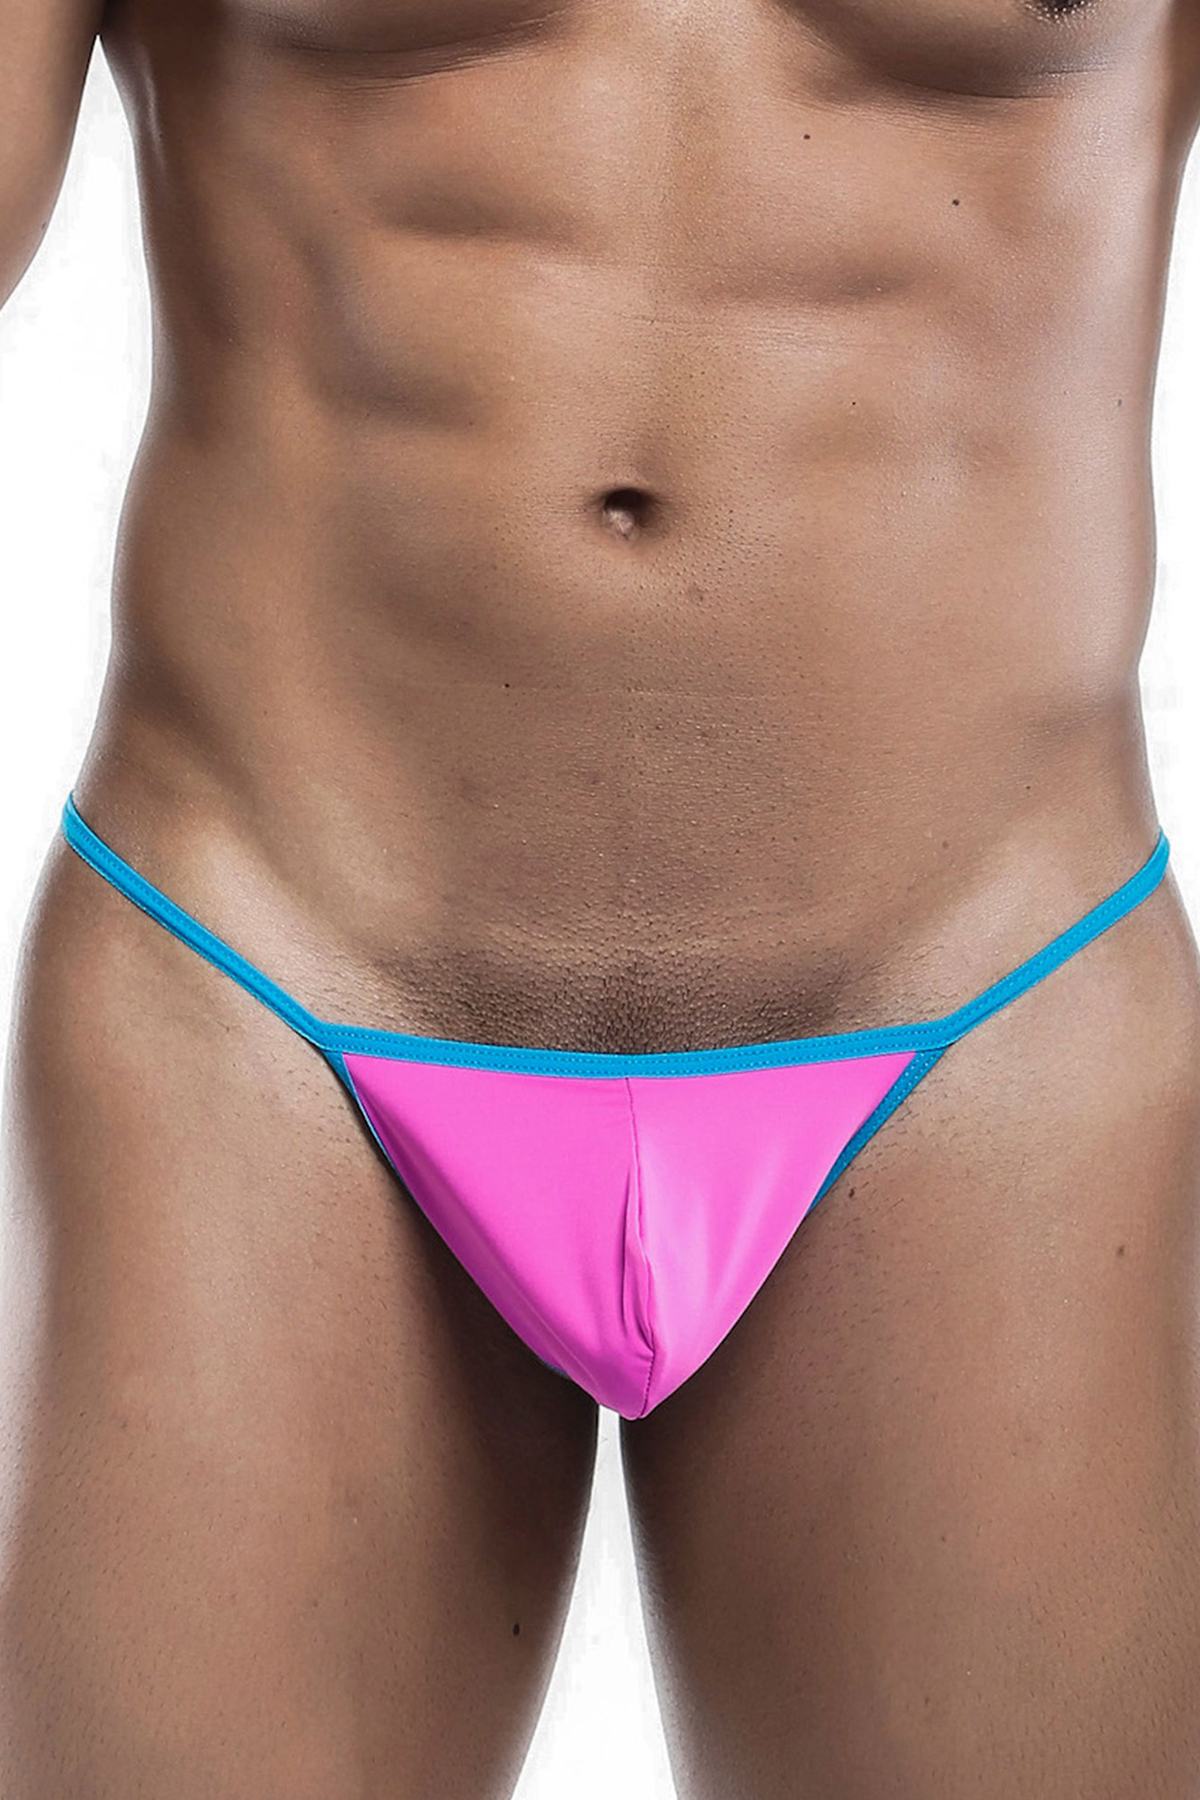 Male Basics Hot-Pink Pouch G-String